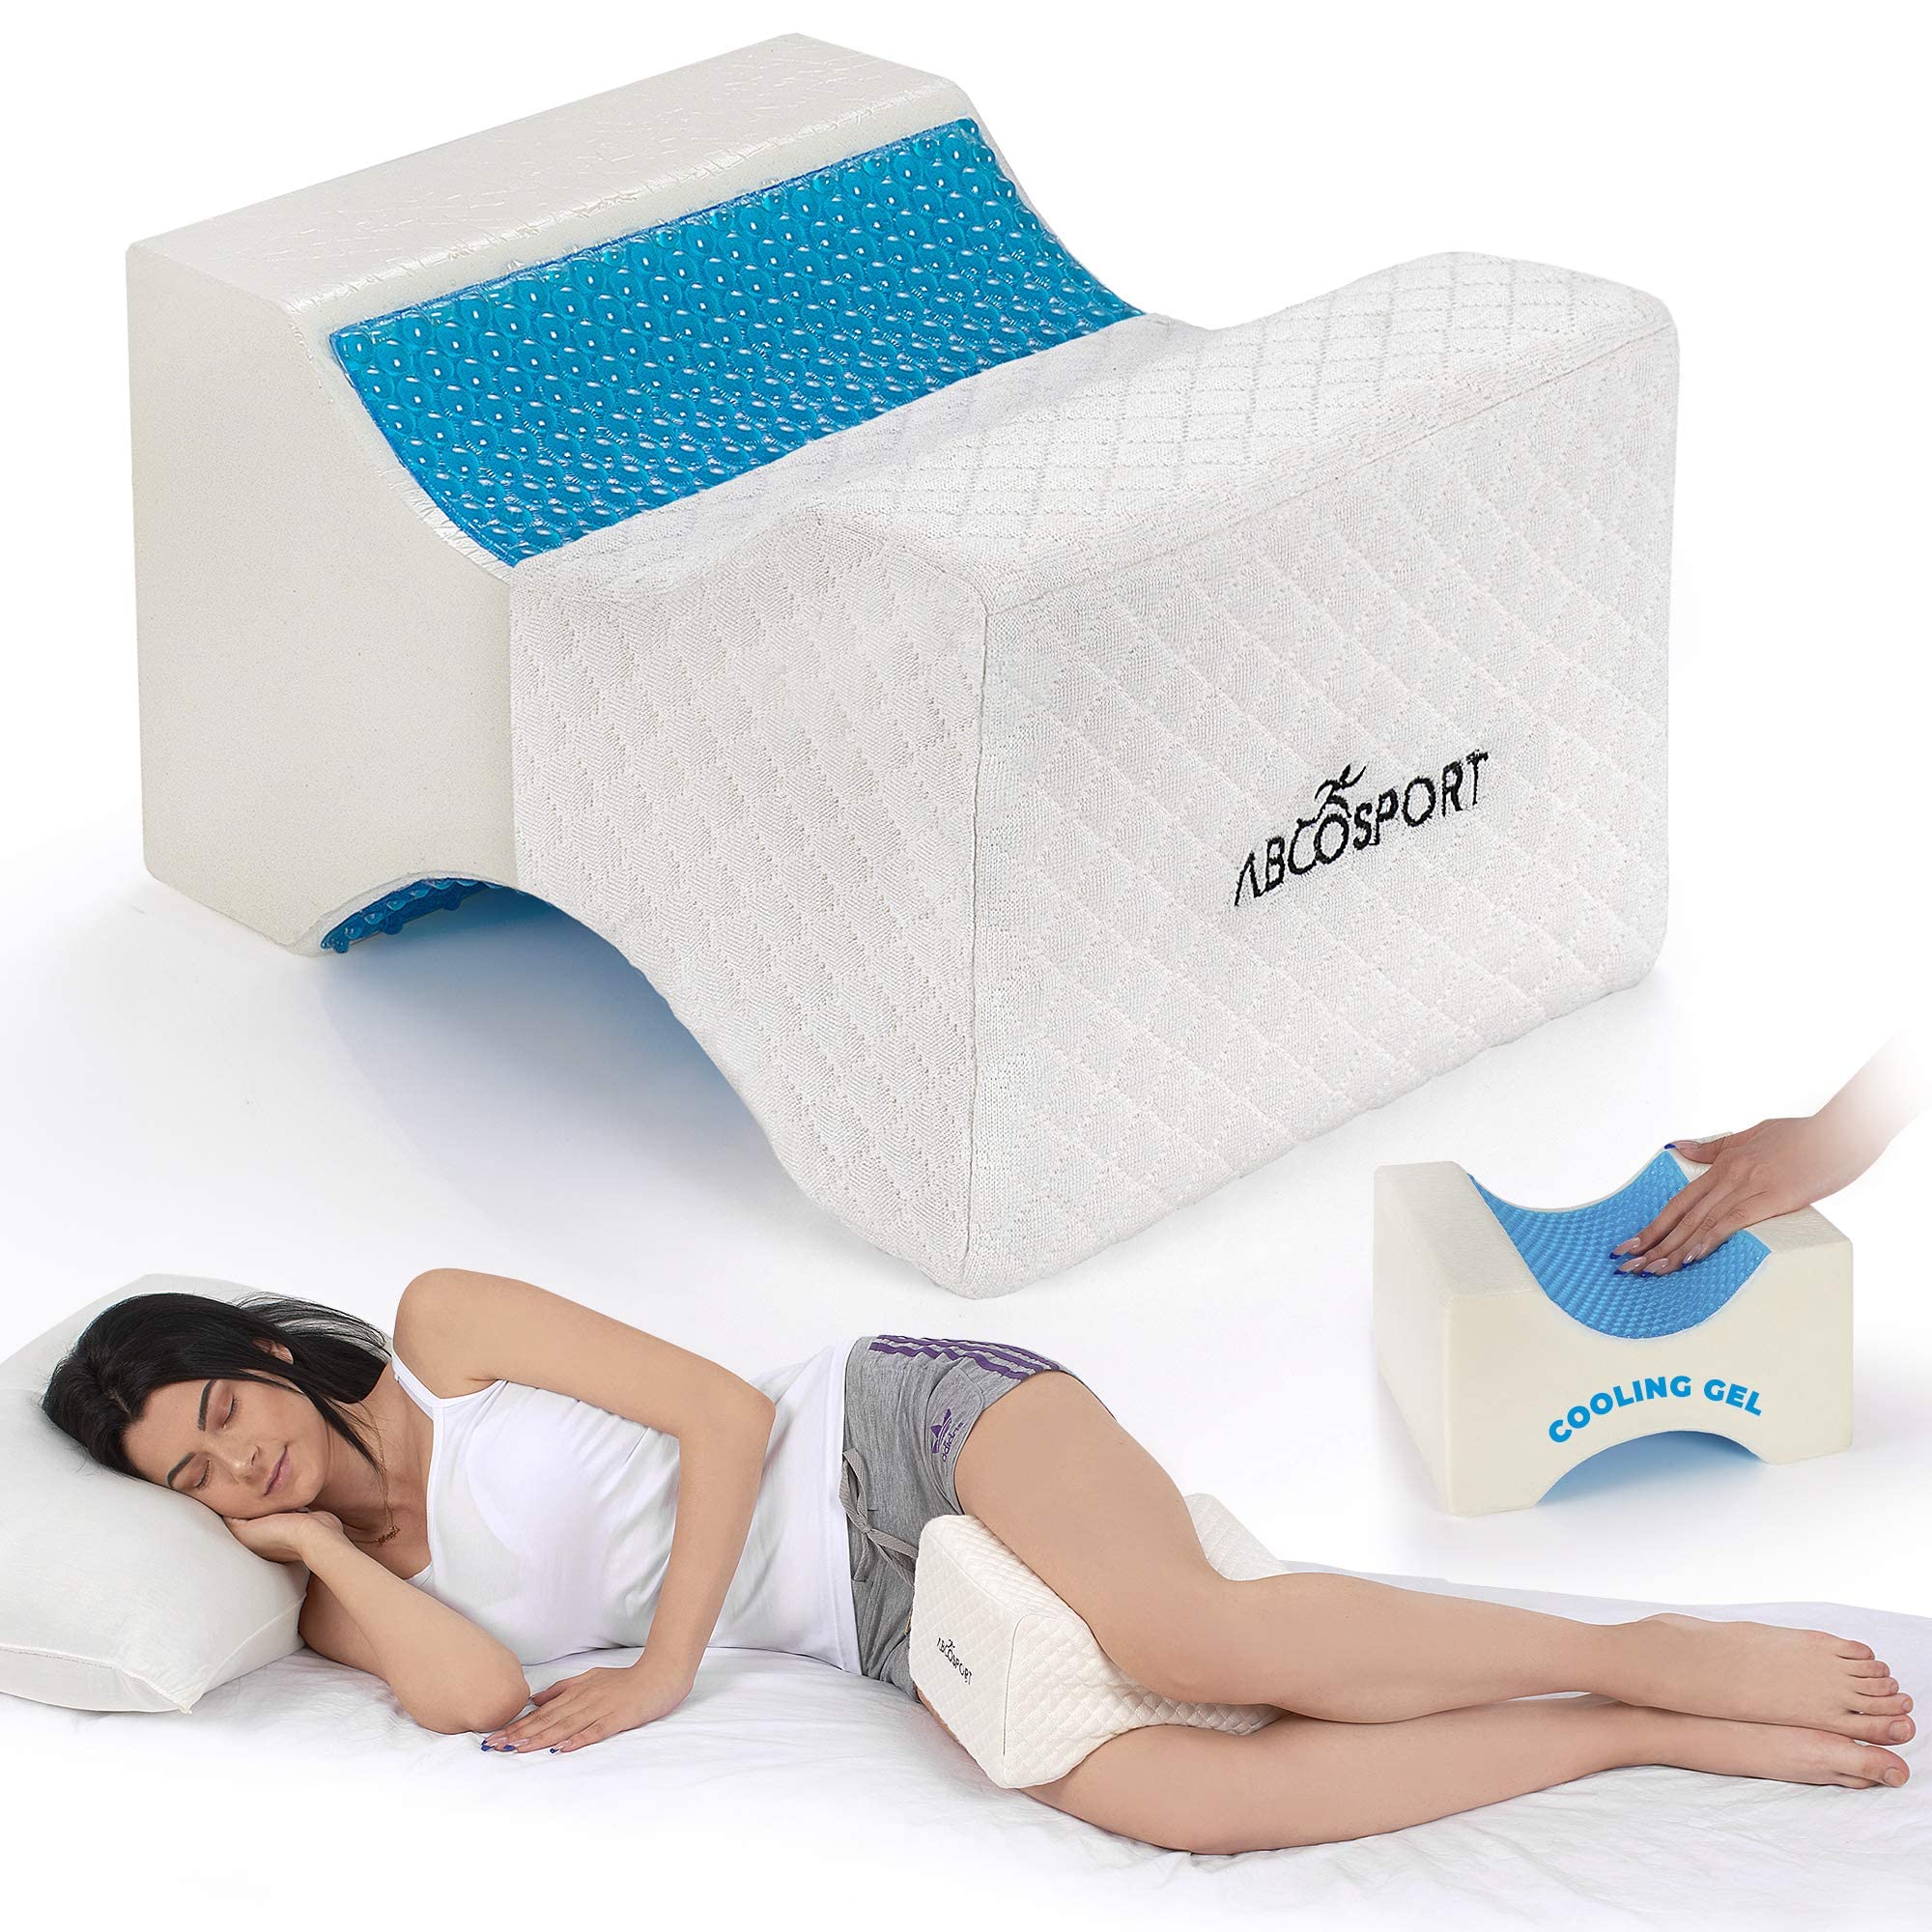 Abco Tech Memory Foam Knee Pillow with Cooling Gel - Knee Wedge Pillow, Leg Pillow for Side Sleepers, Pregnancy, Spine Alignment, Pain Relief - Pillow for Between Knees While Sleeping + Washable Cover  - Very Good